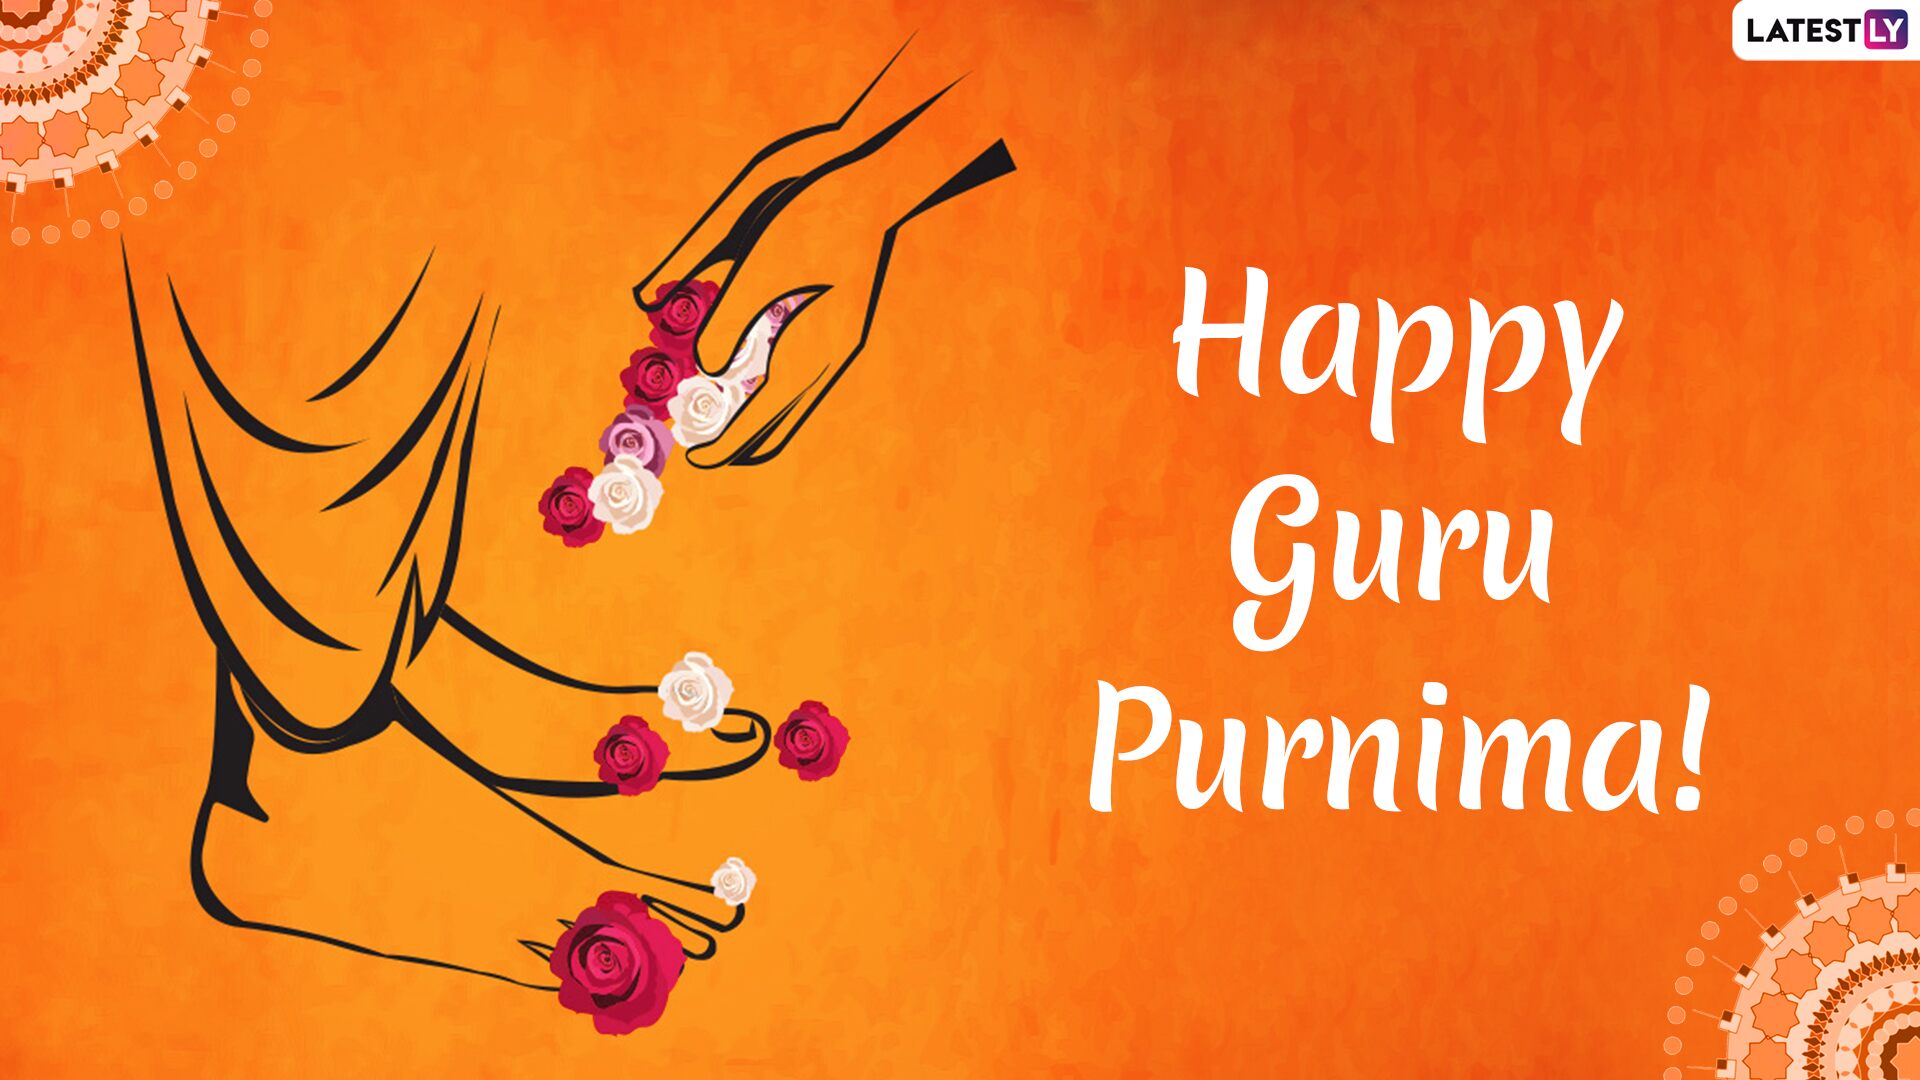 Happy Guru Purnima 2021 HD Images, Greetings & Wallpapers: Vyasa Purnima  Quotes, Photos, and Messages You Can Send Your Teachers as a Thank You